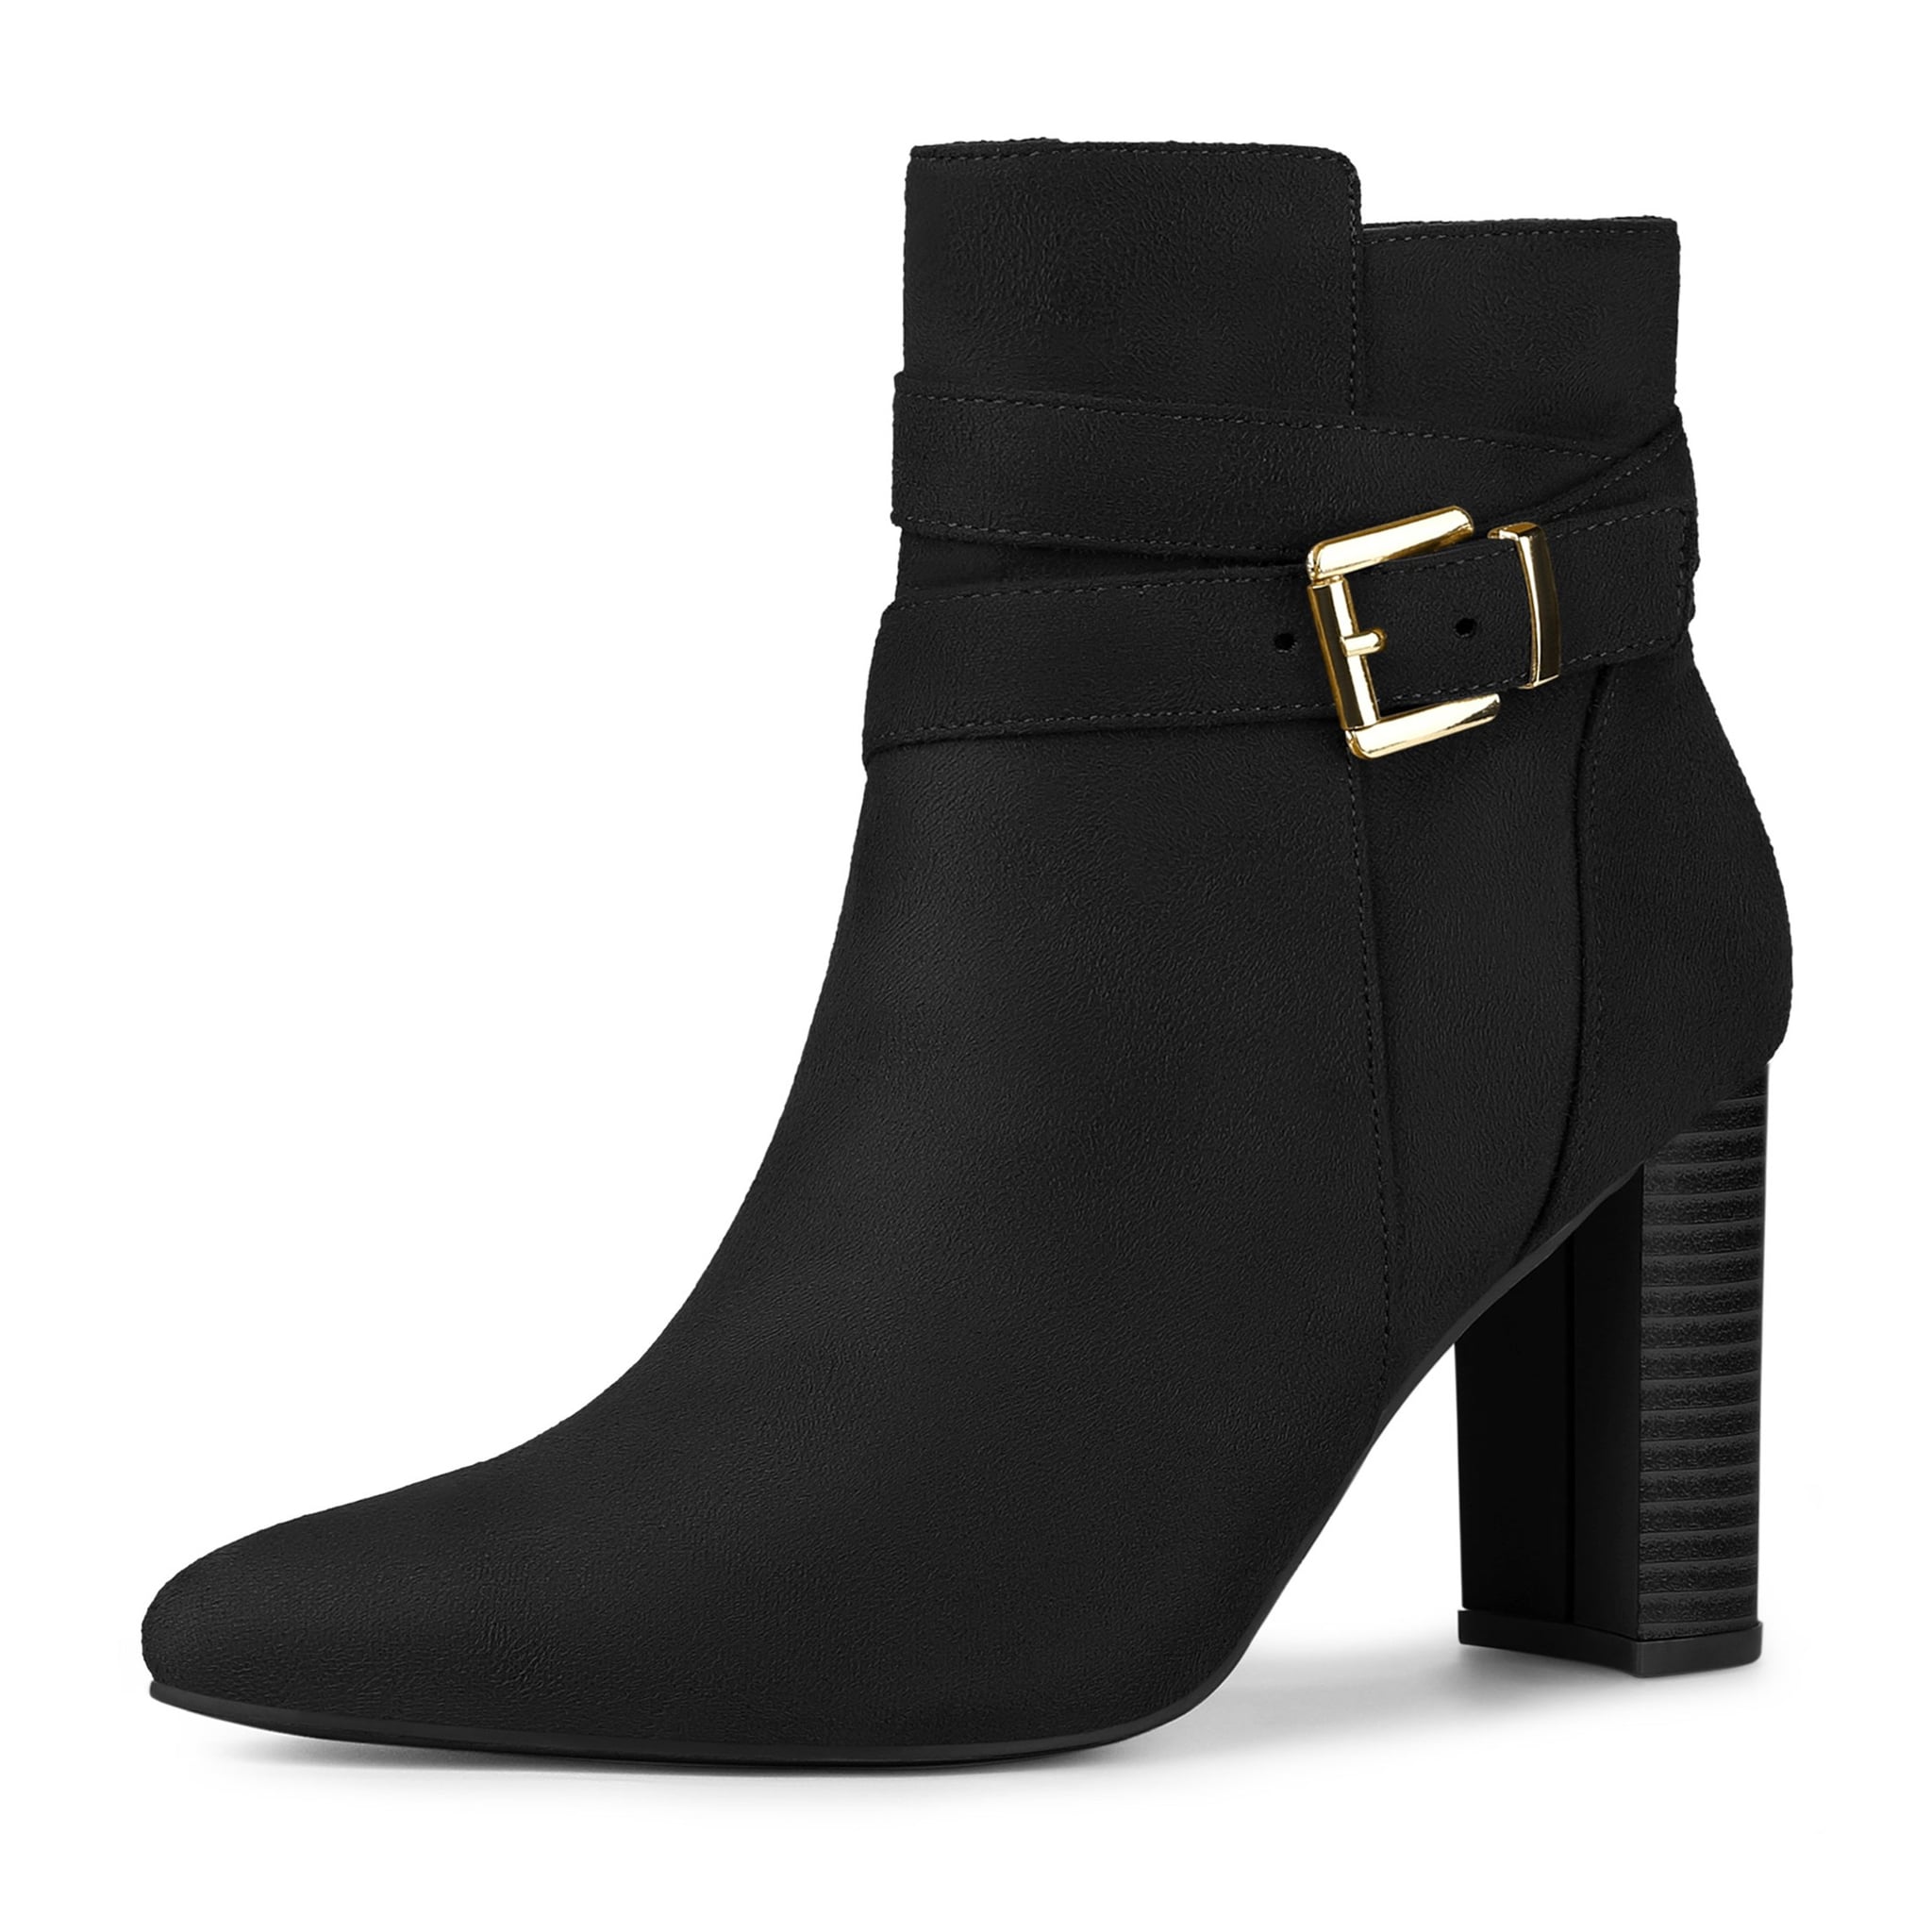 Best Black Boots: 19 Chic Pairs That You'll Love Forever